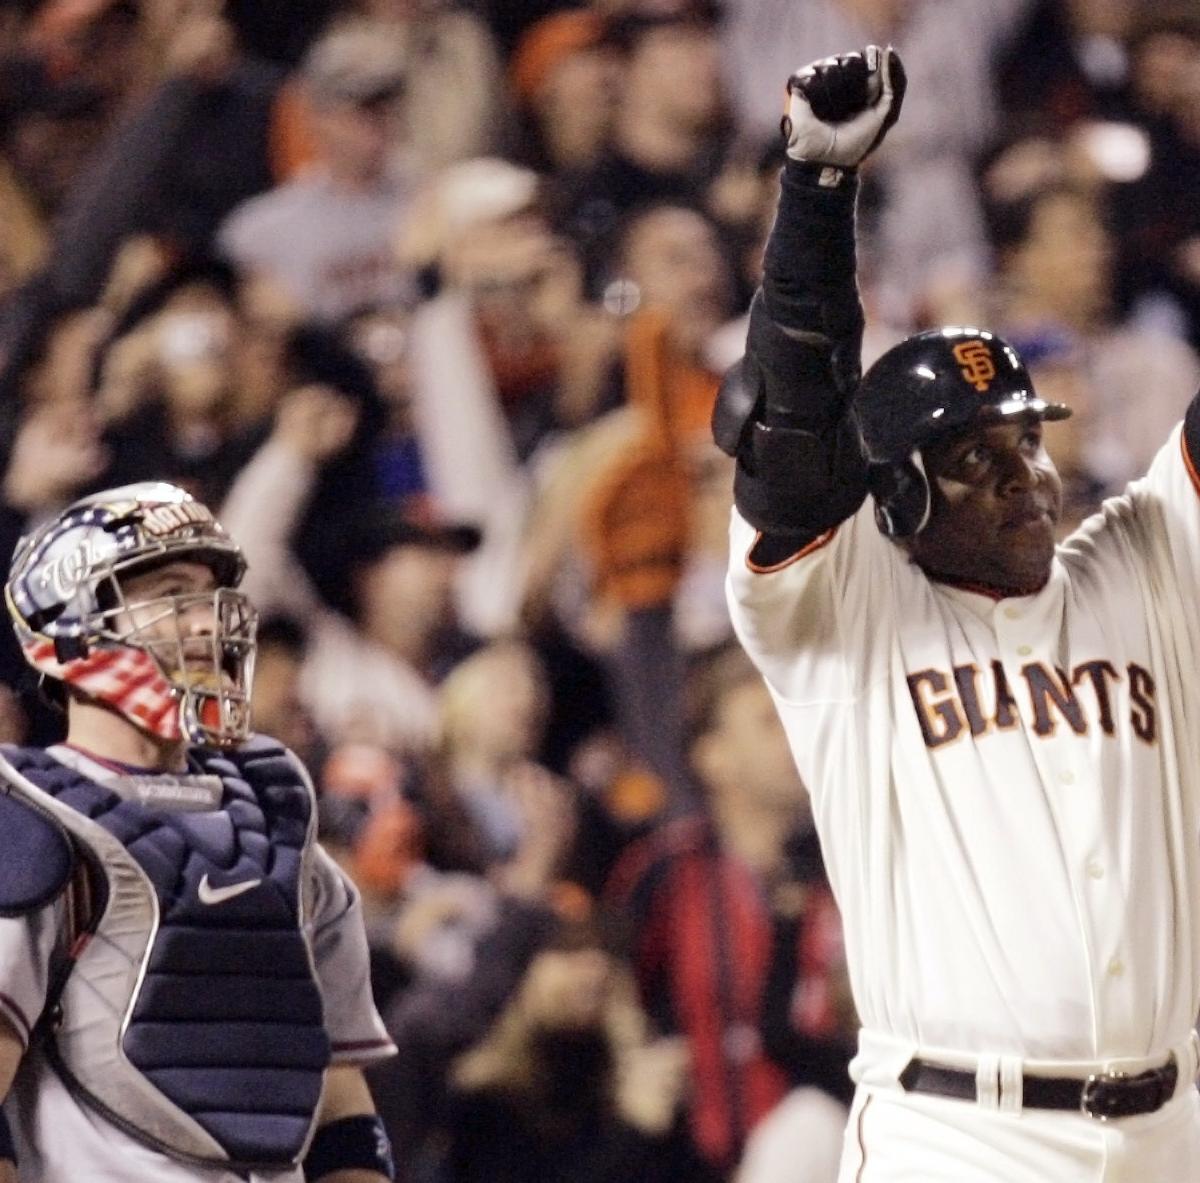 What Is Barry Bonds' Net Worth?